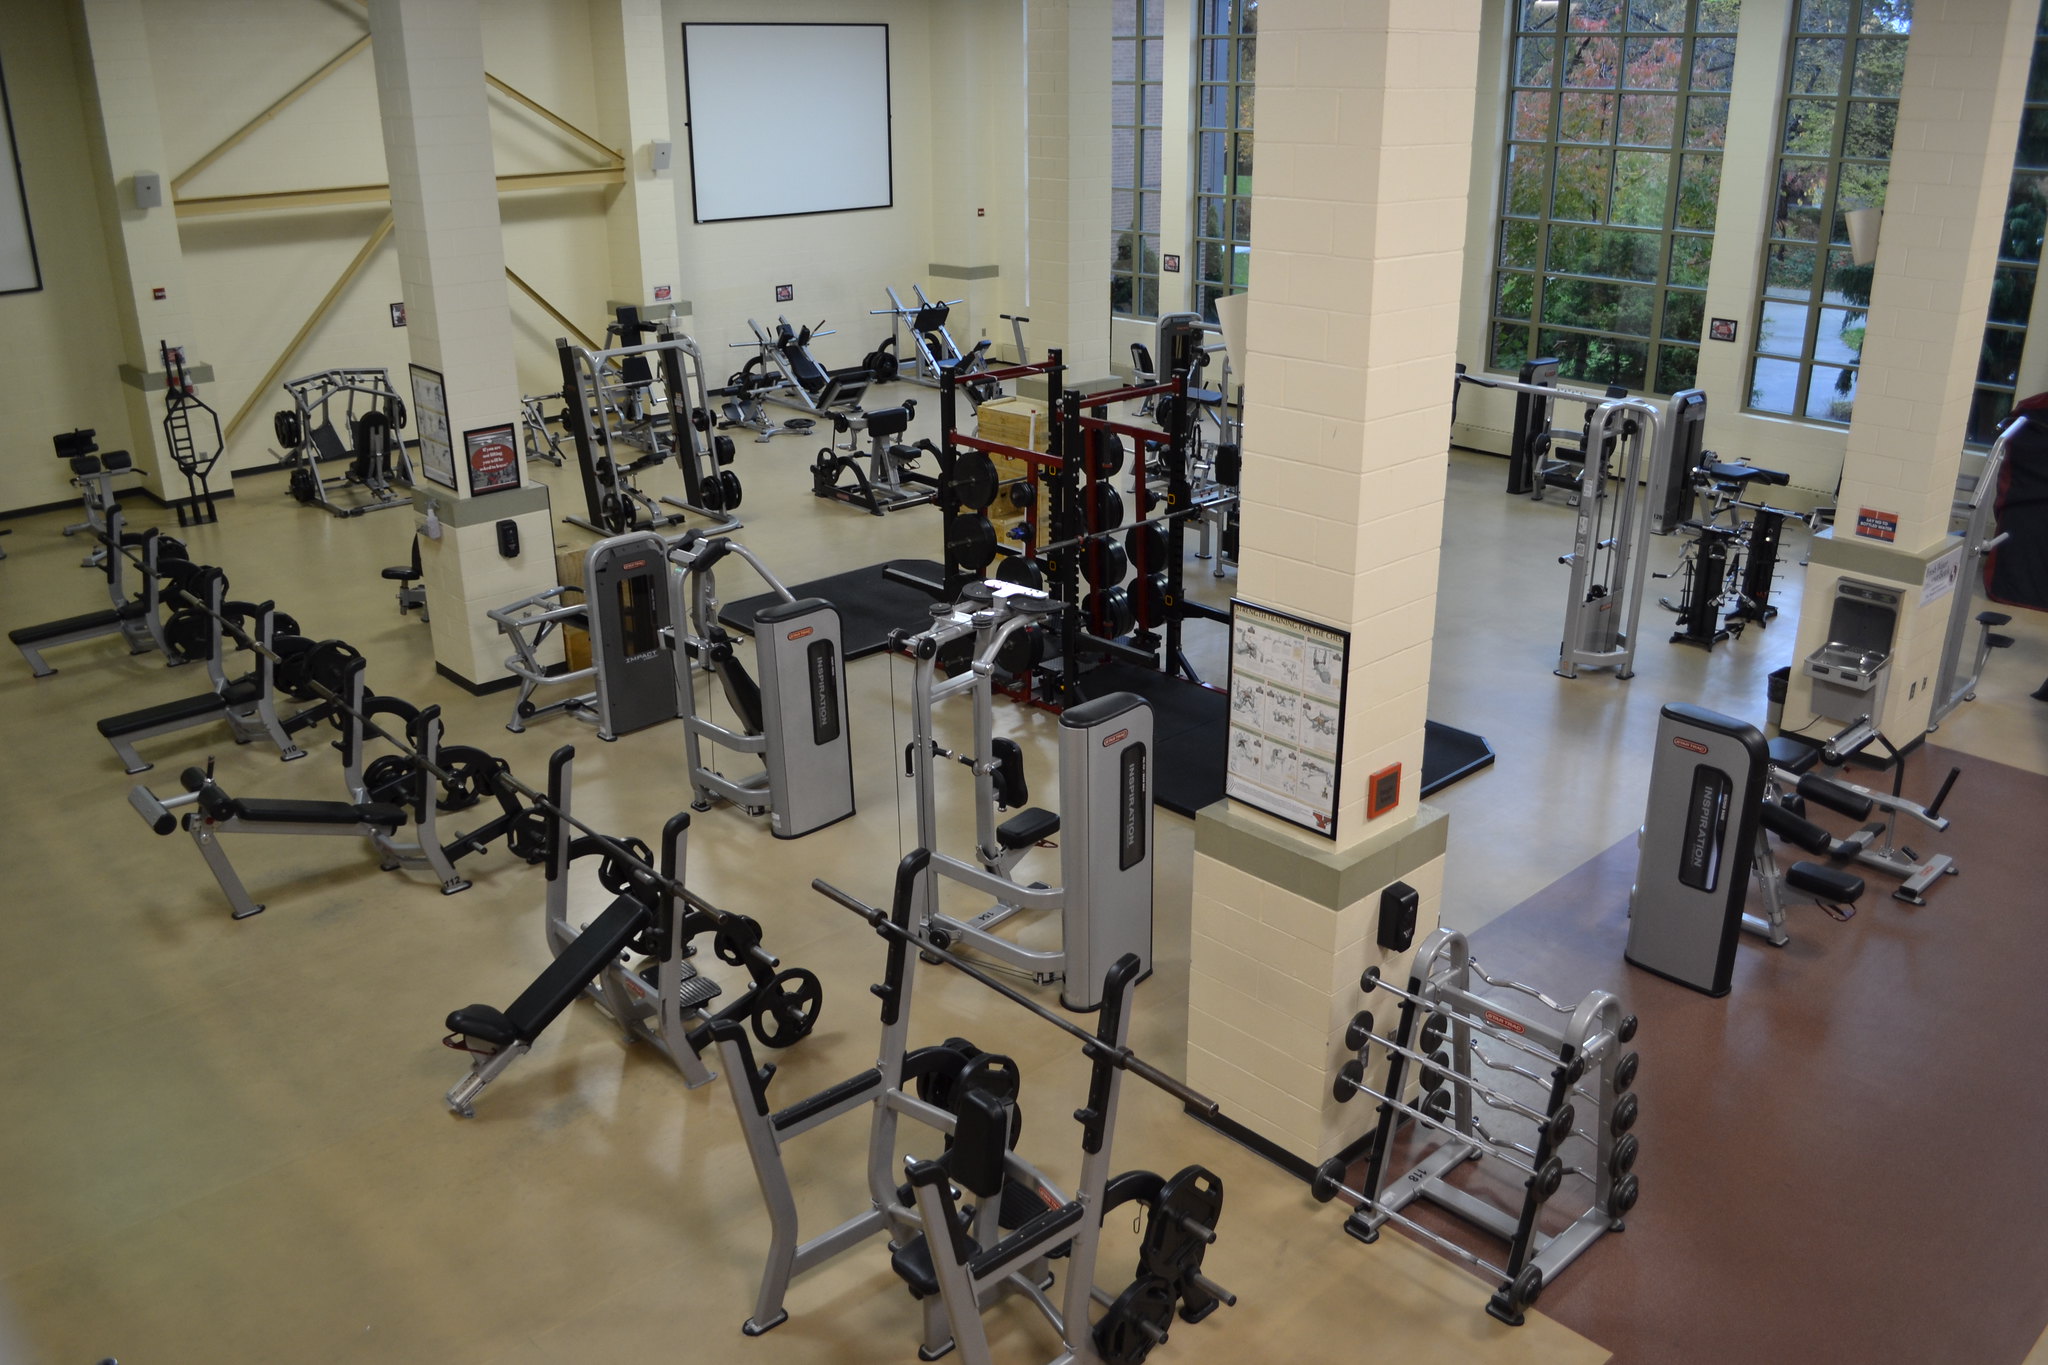 Strength Equipment Available in the Rec Center